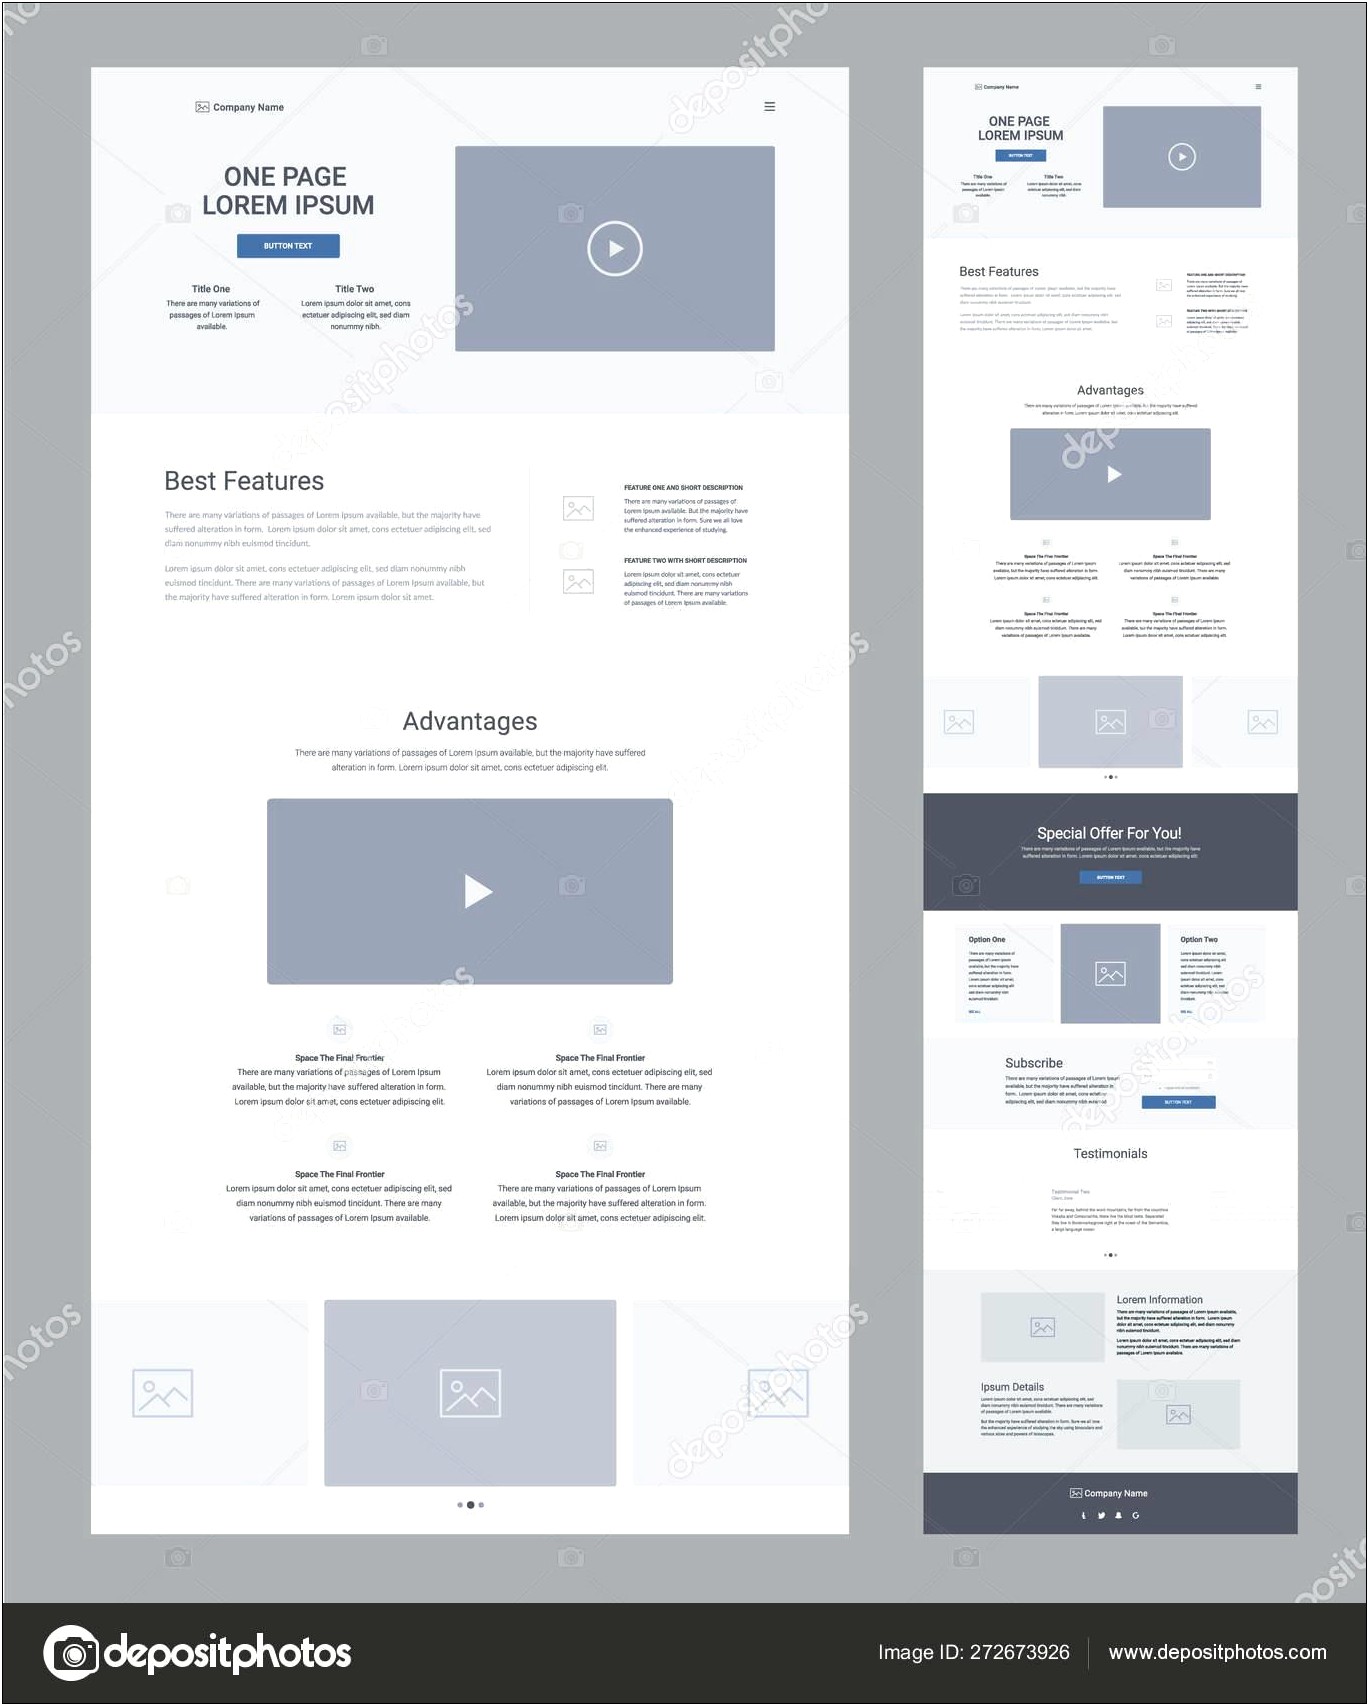 One Page Web Design Template Free